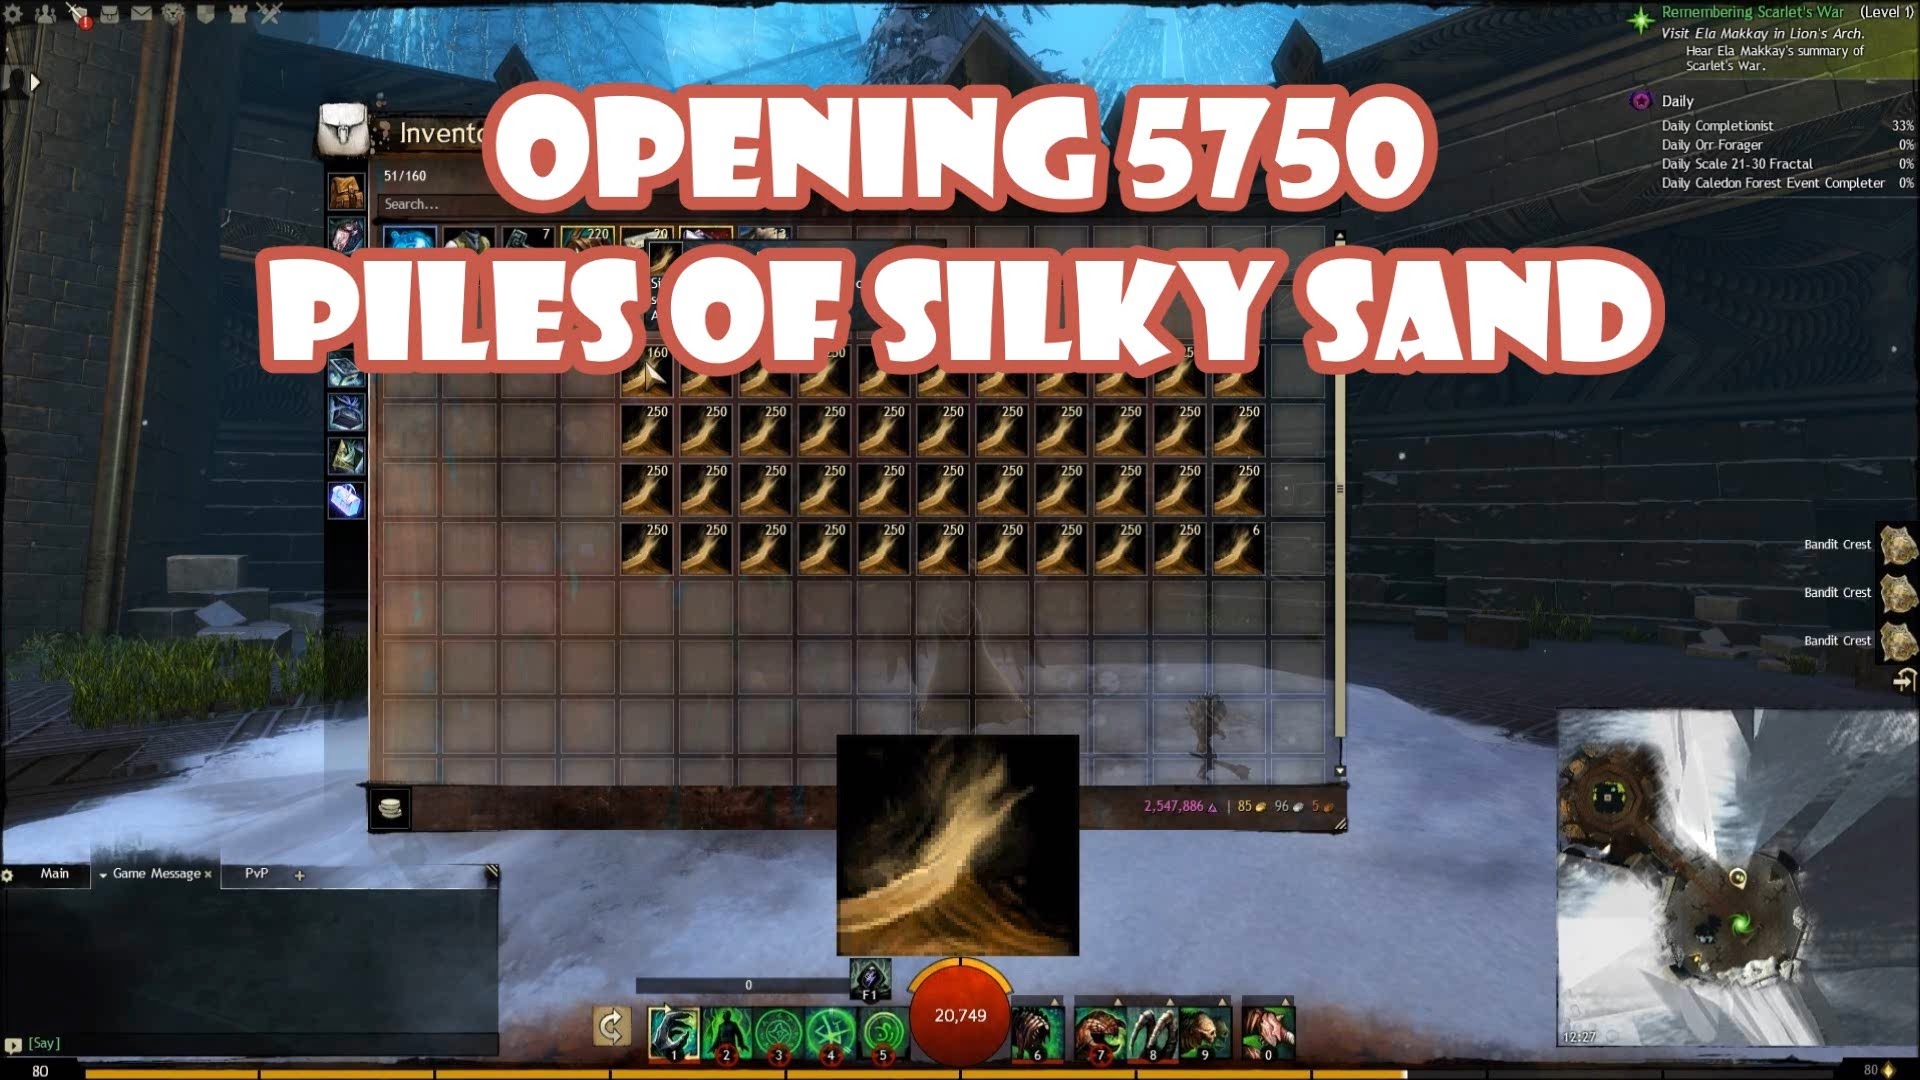 Opening 5750 Piles of Silky Sand